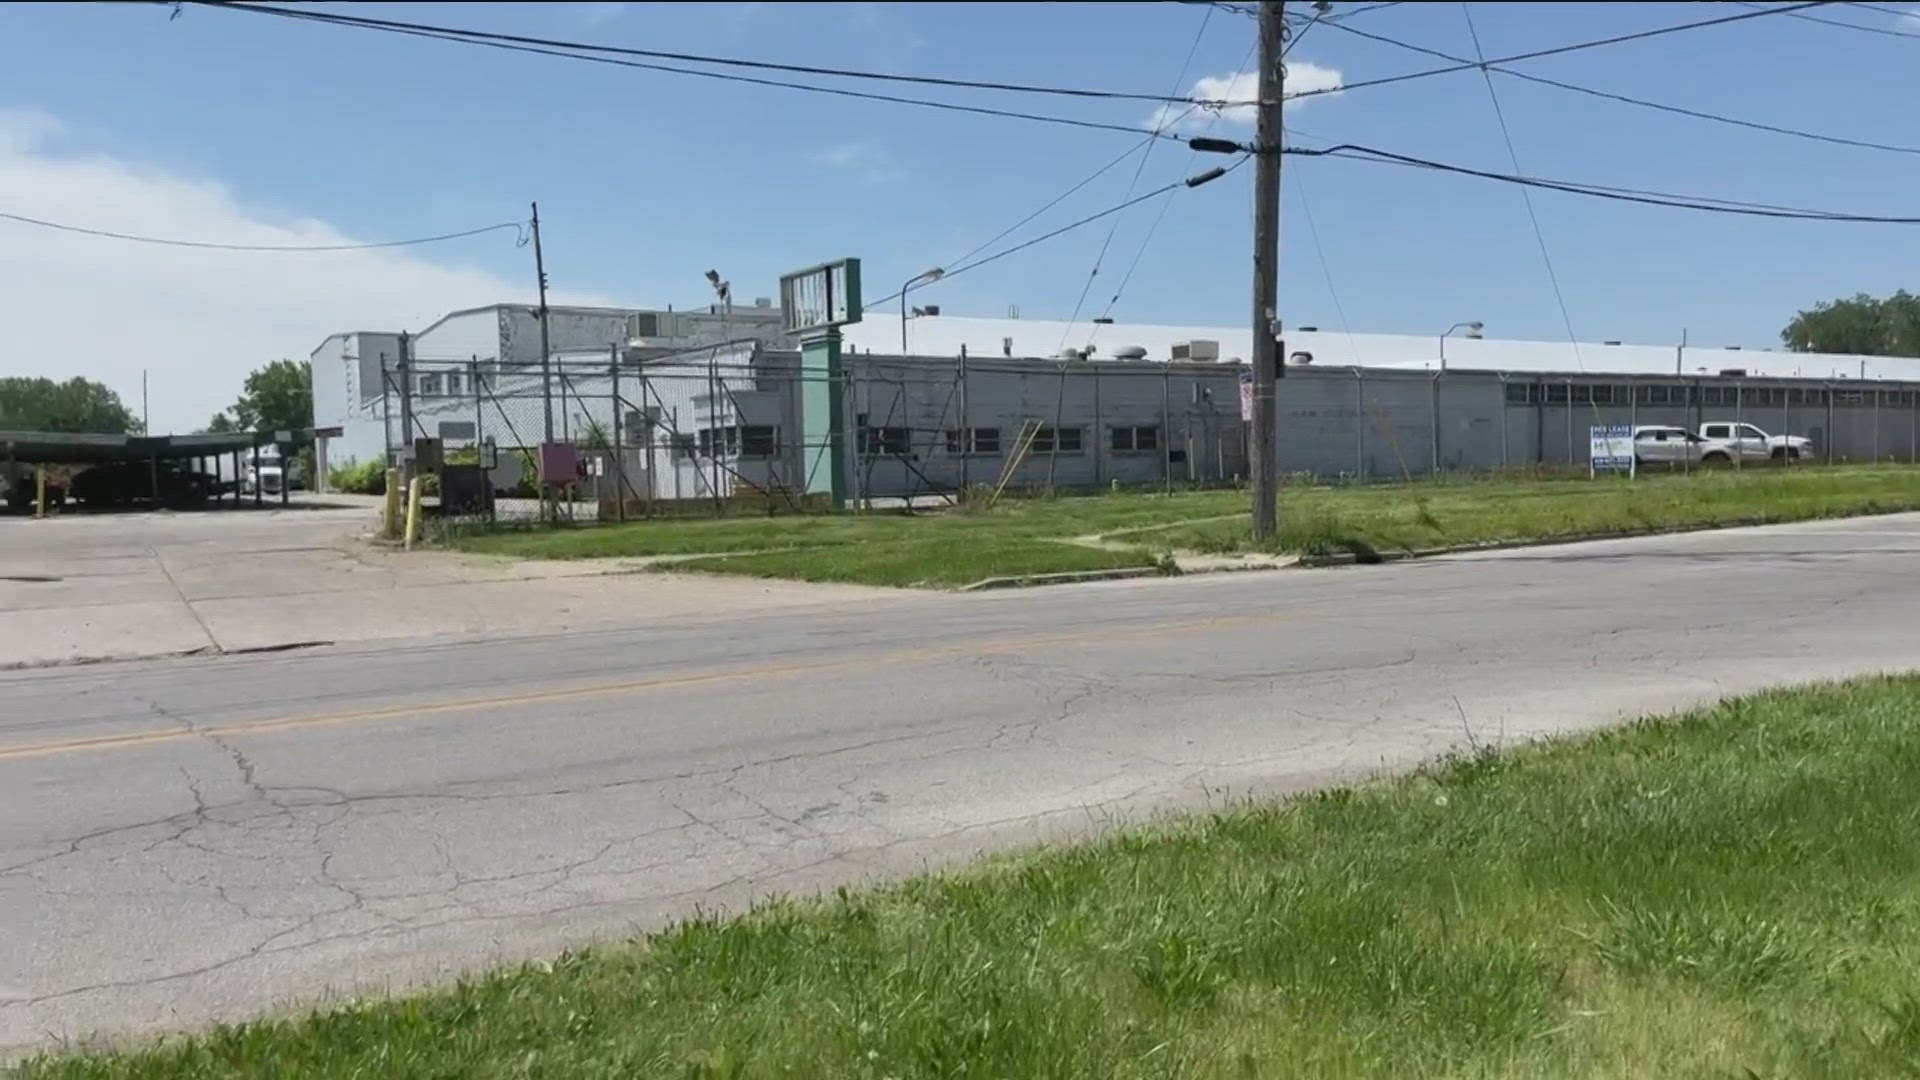 There is no active threat to public health and safety, authorities told WTOL 11.